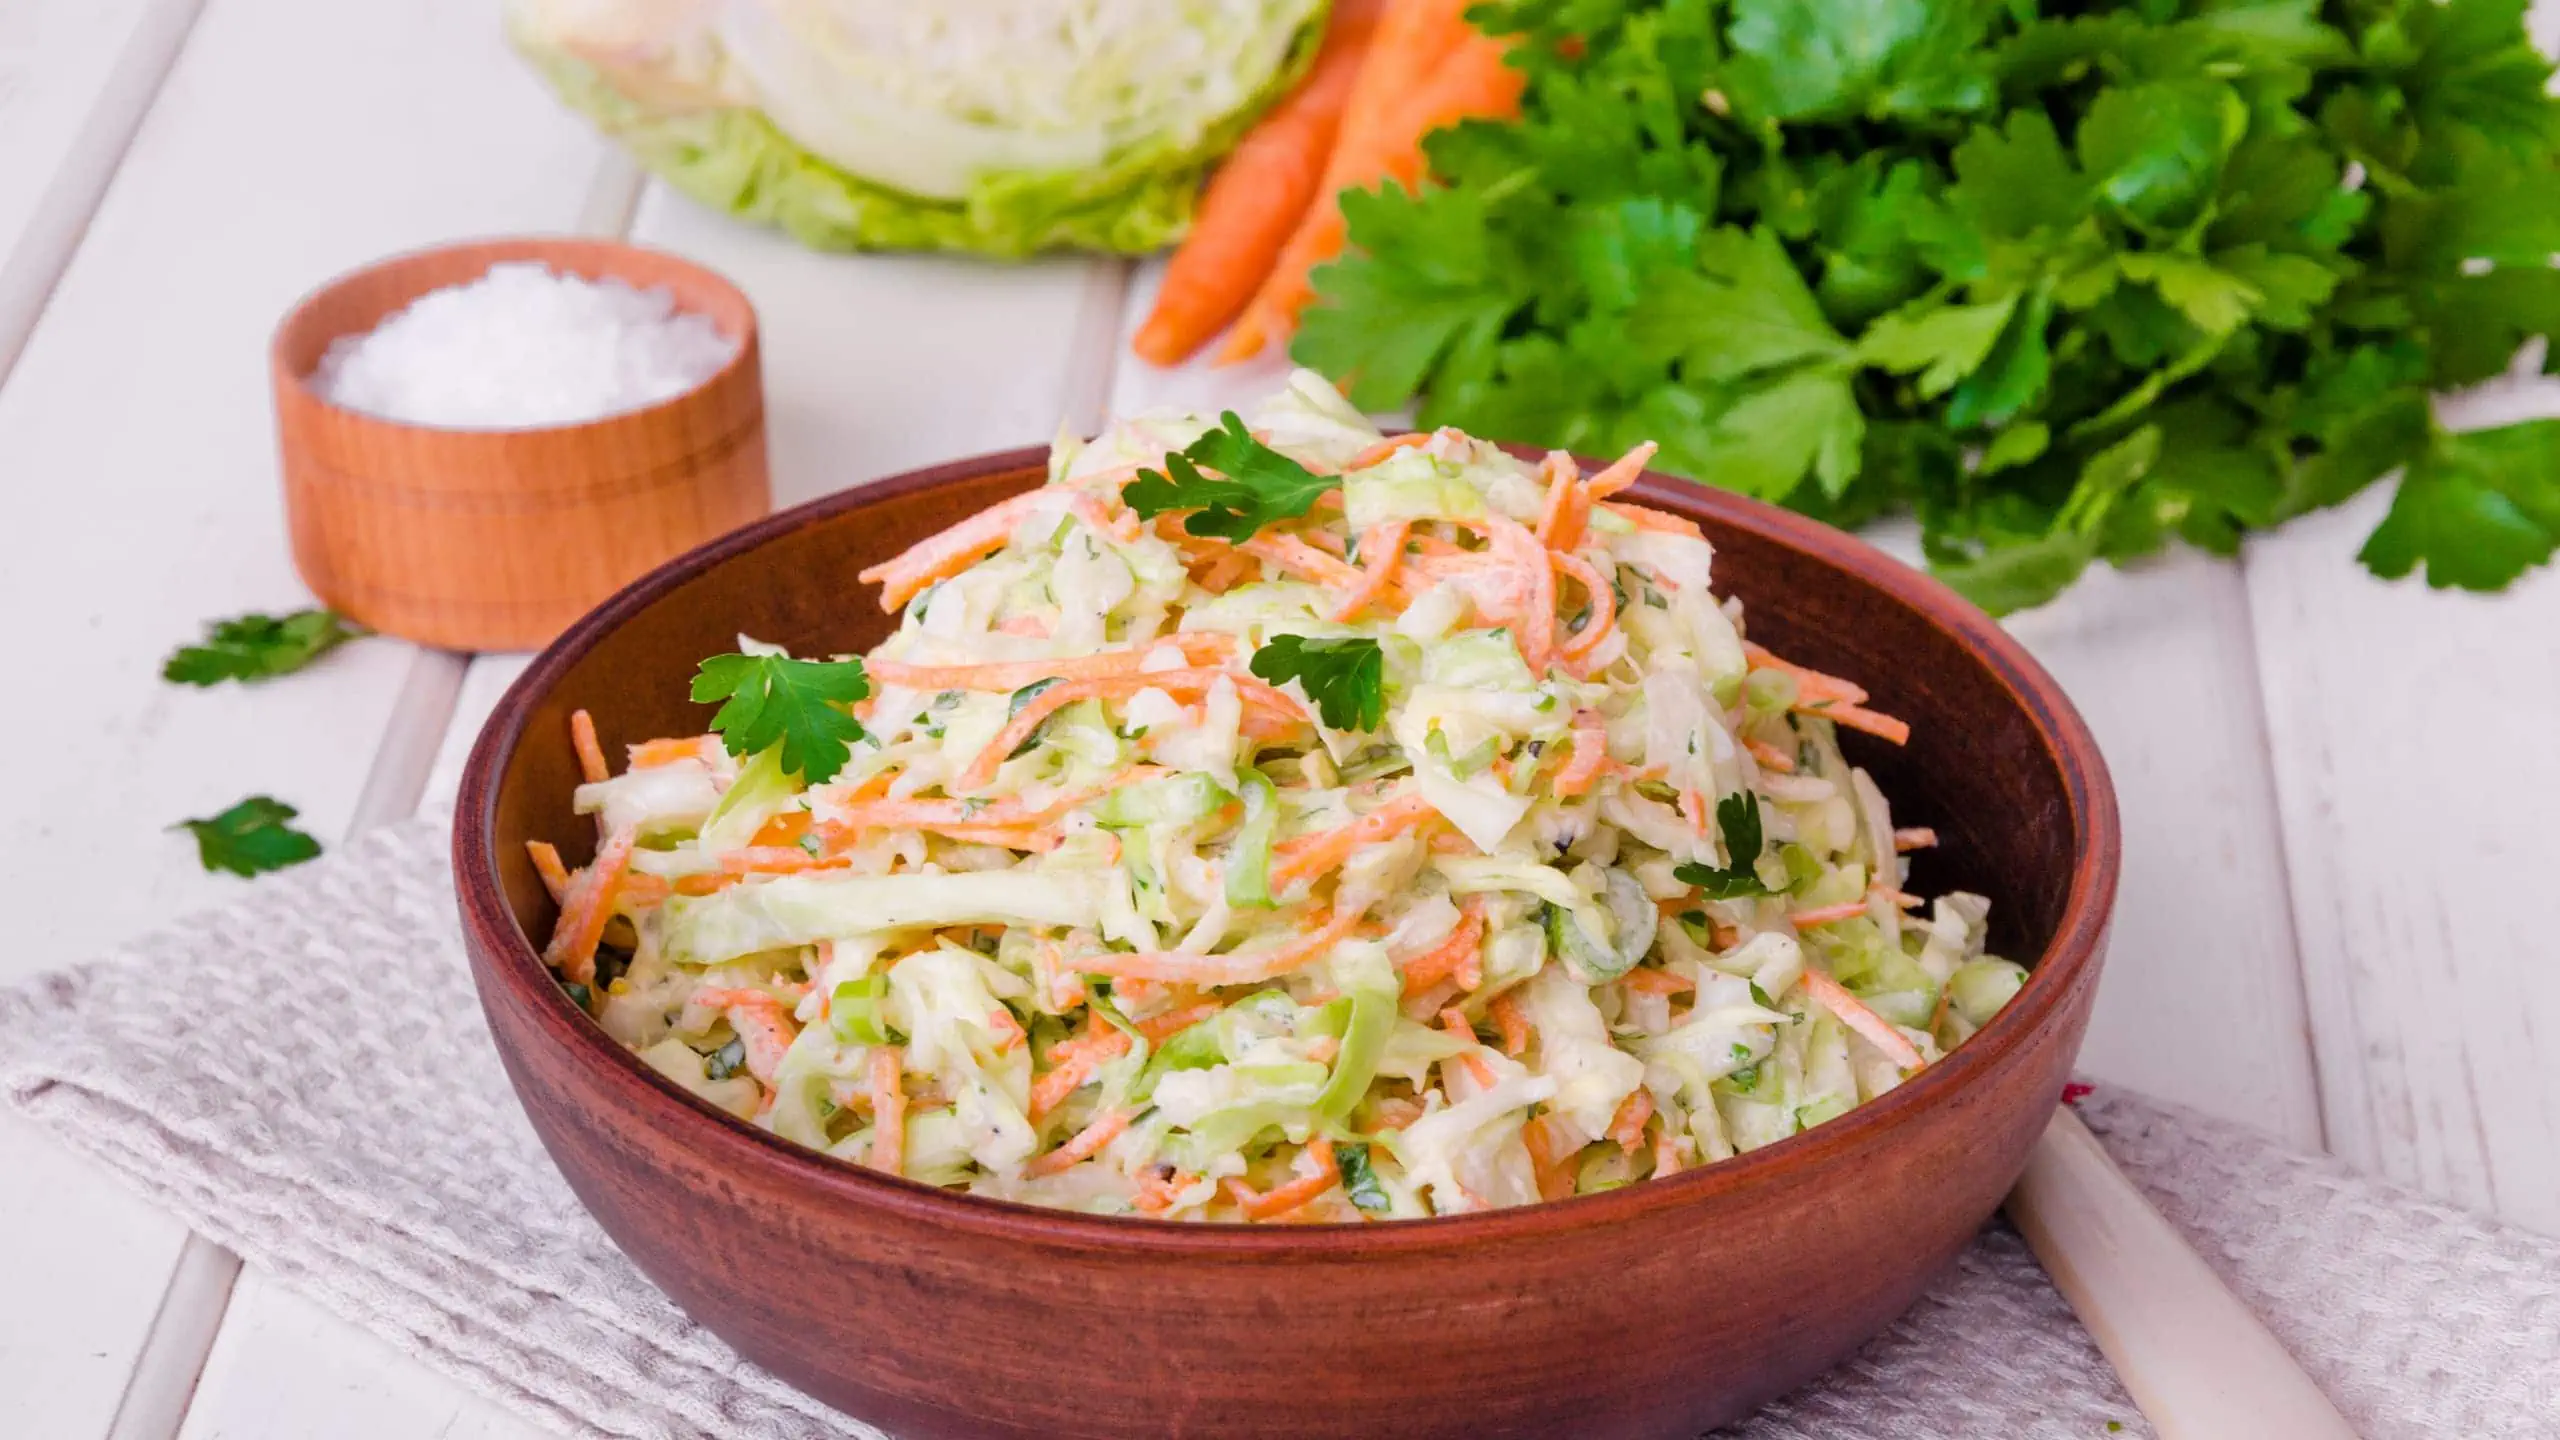 Our version of Long John Silver's coleslaw recipe